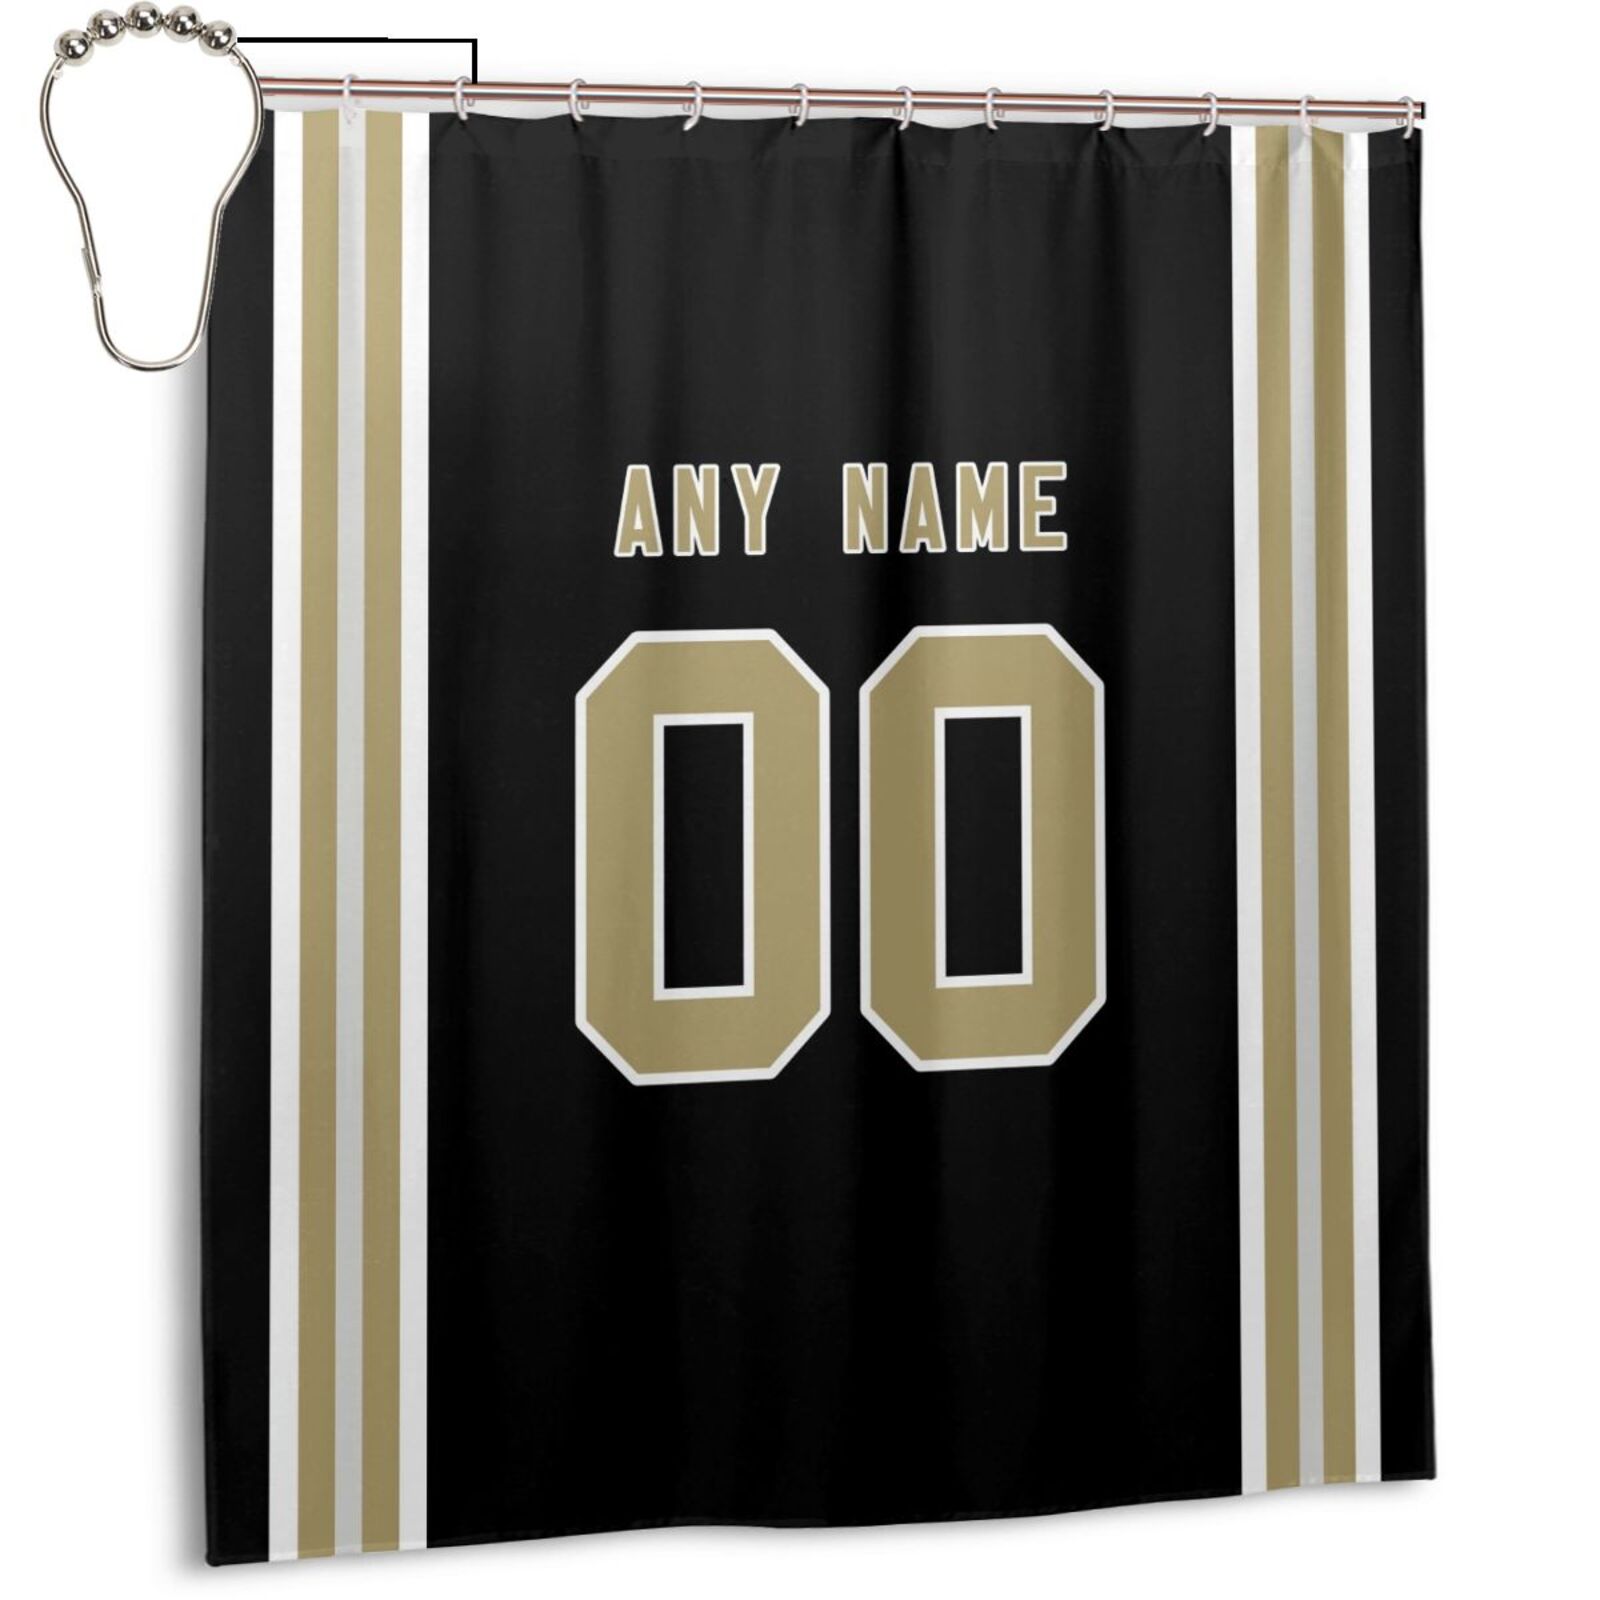 Potteroy New Orleans Saints Team Design Shower Curtain Waterproof Polyester Fabr 